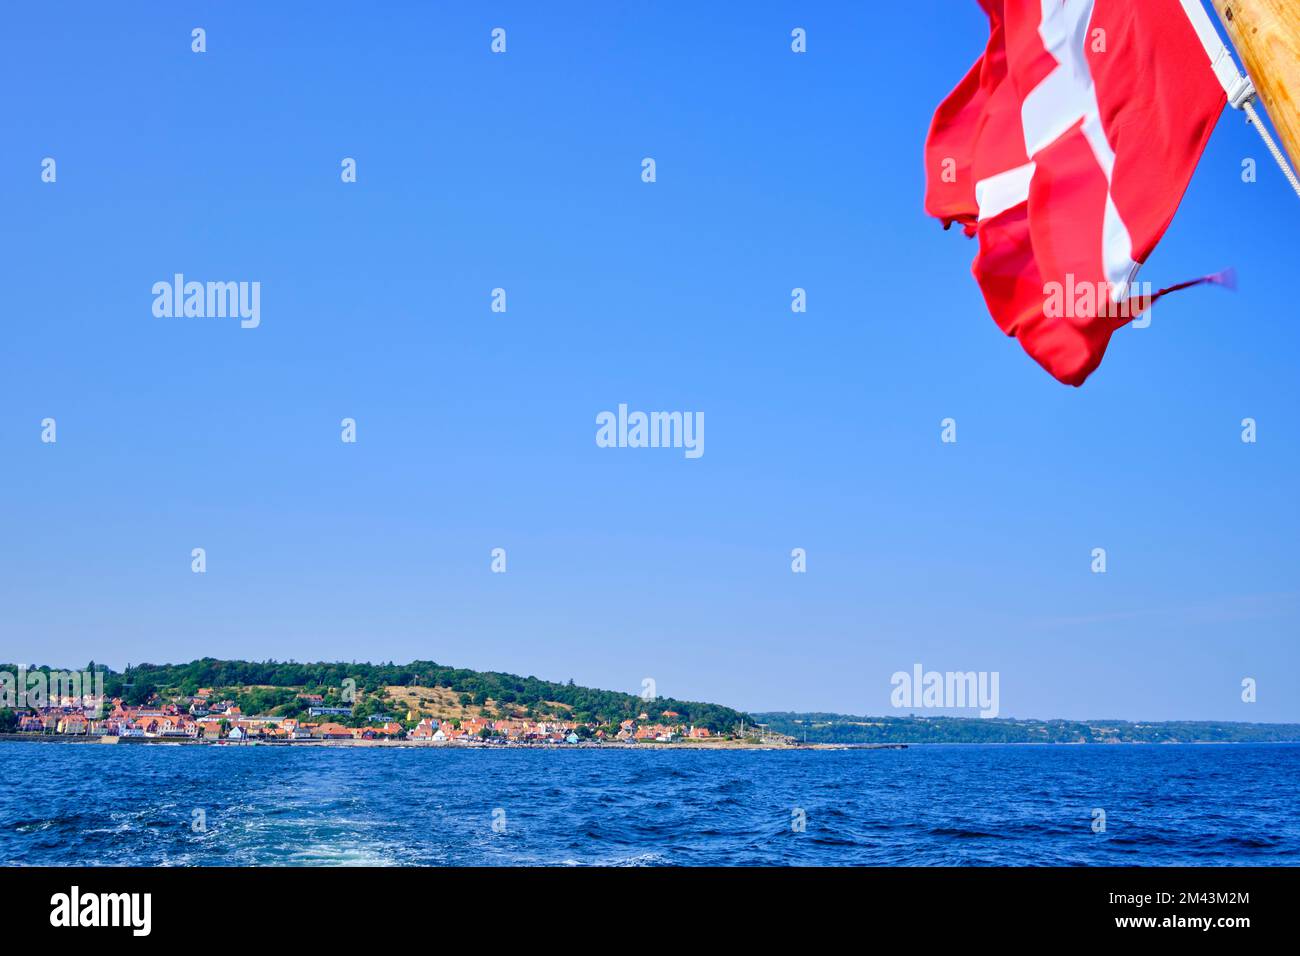 Flying Danish flag at the stern of an excursion boat and picturesque view of the coastline of Gudhjem, Bornholm island, Denmark. Stock Photo